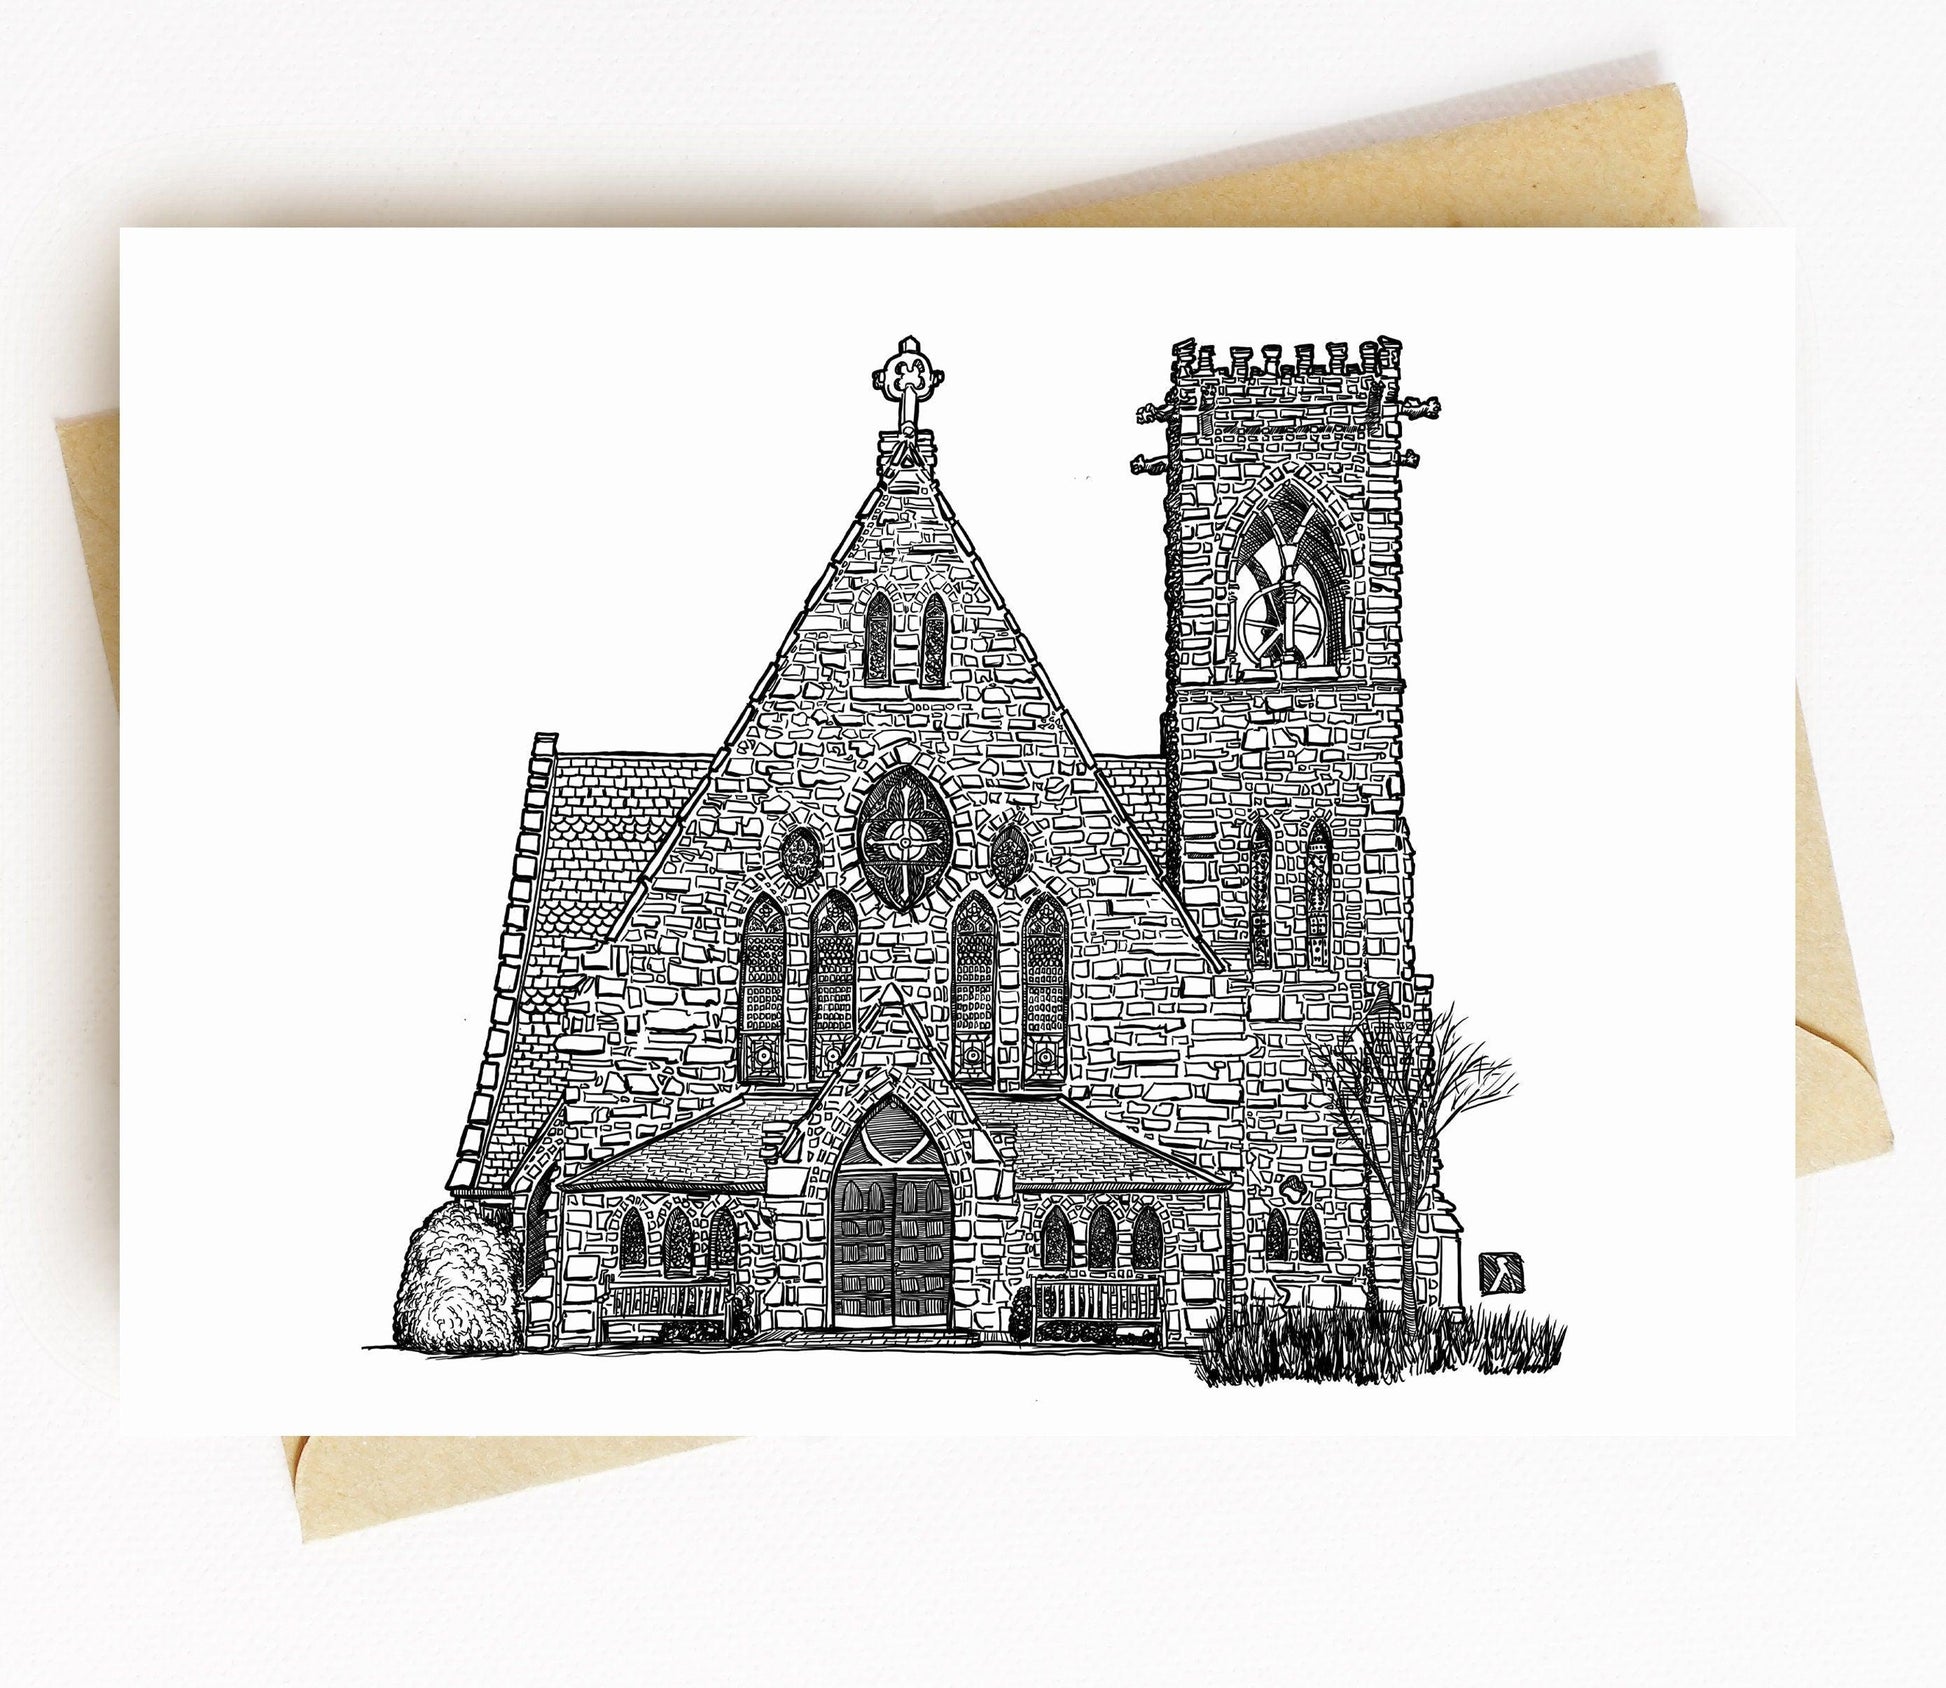 BellavanceInk: Greeting Card With A Pen & Ink Drawing Of The Chapel In Charlottesville, Virginia 5 x 7 Inches - BellavanceInk